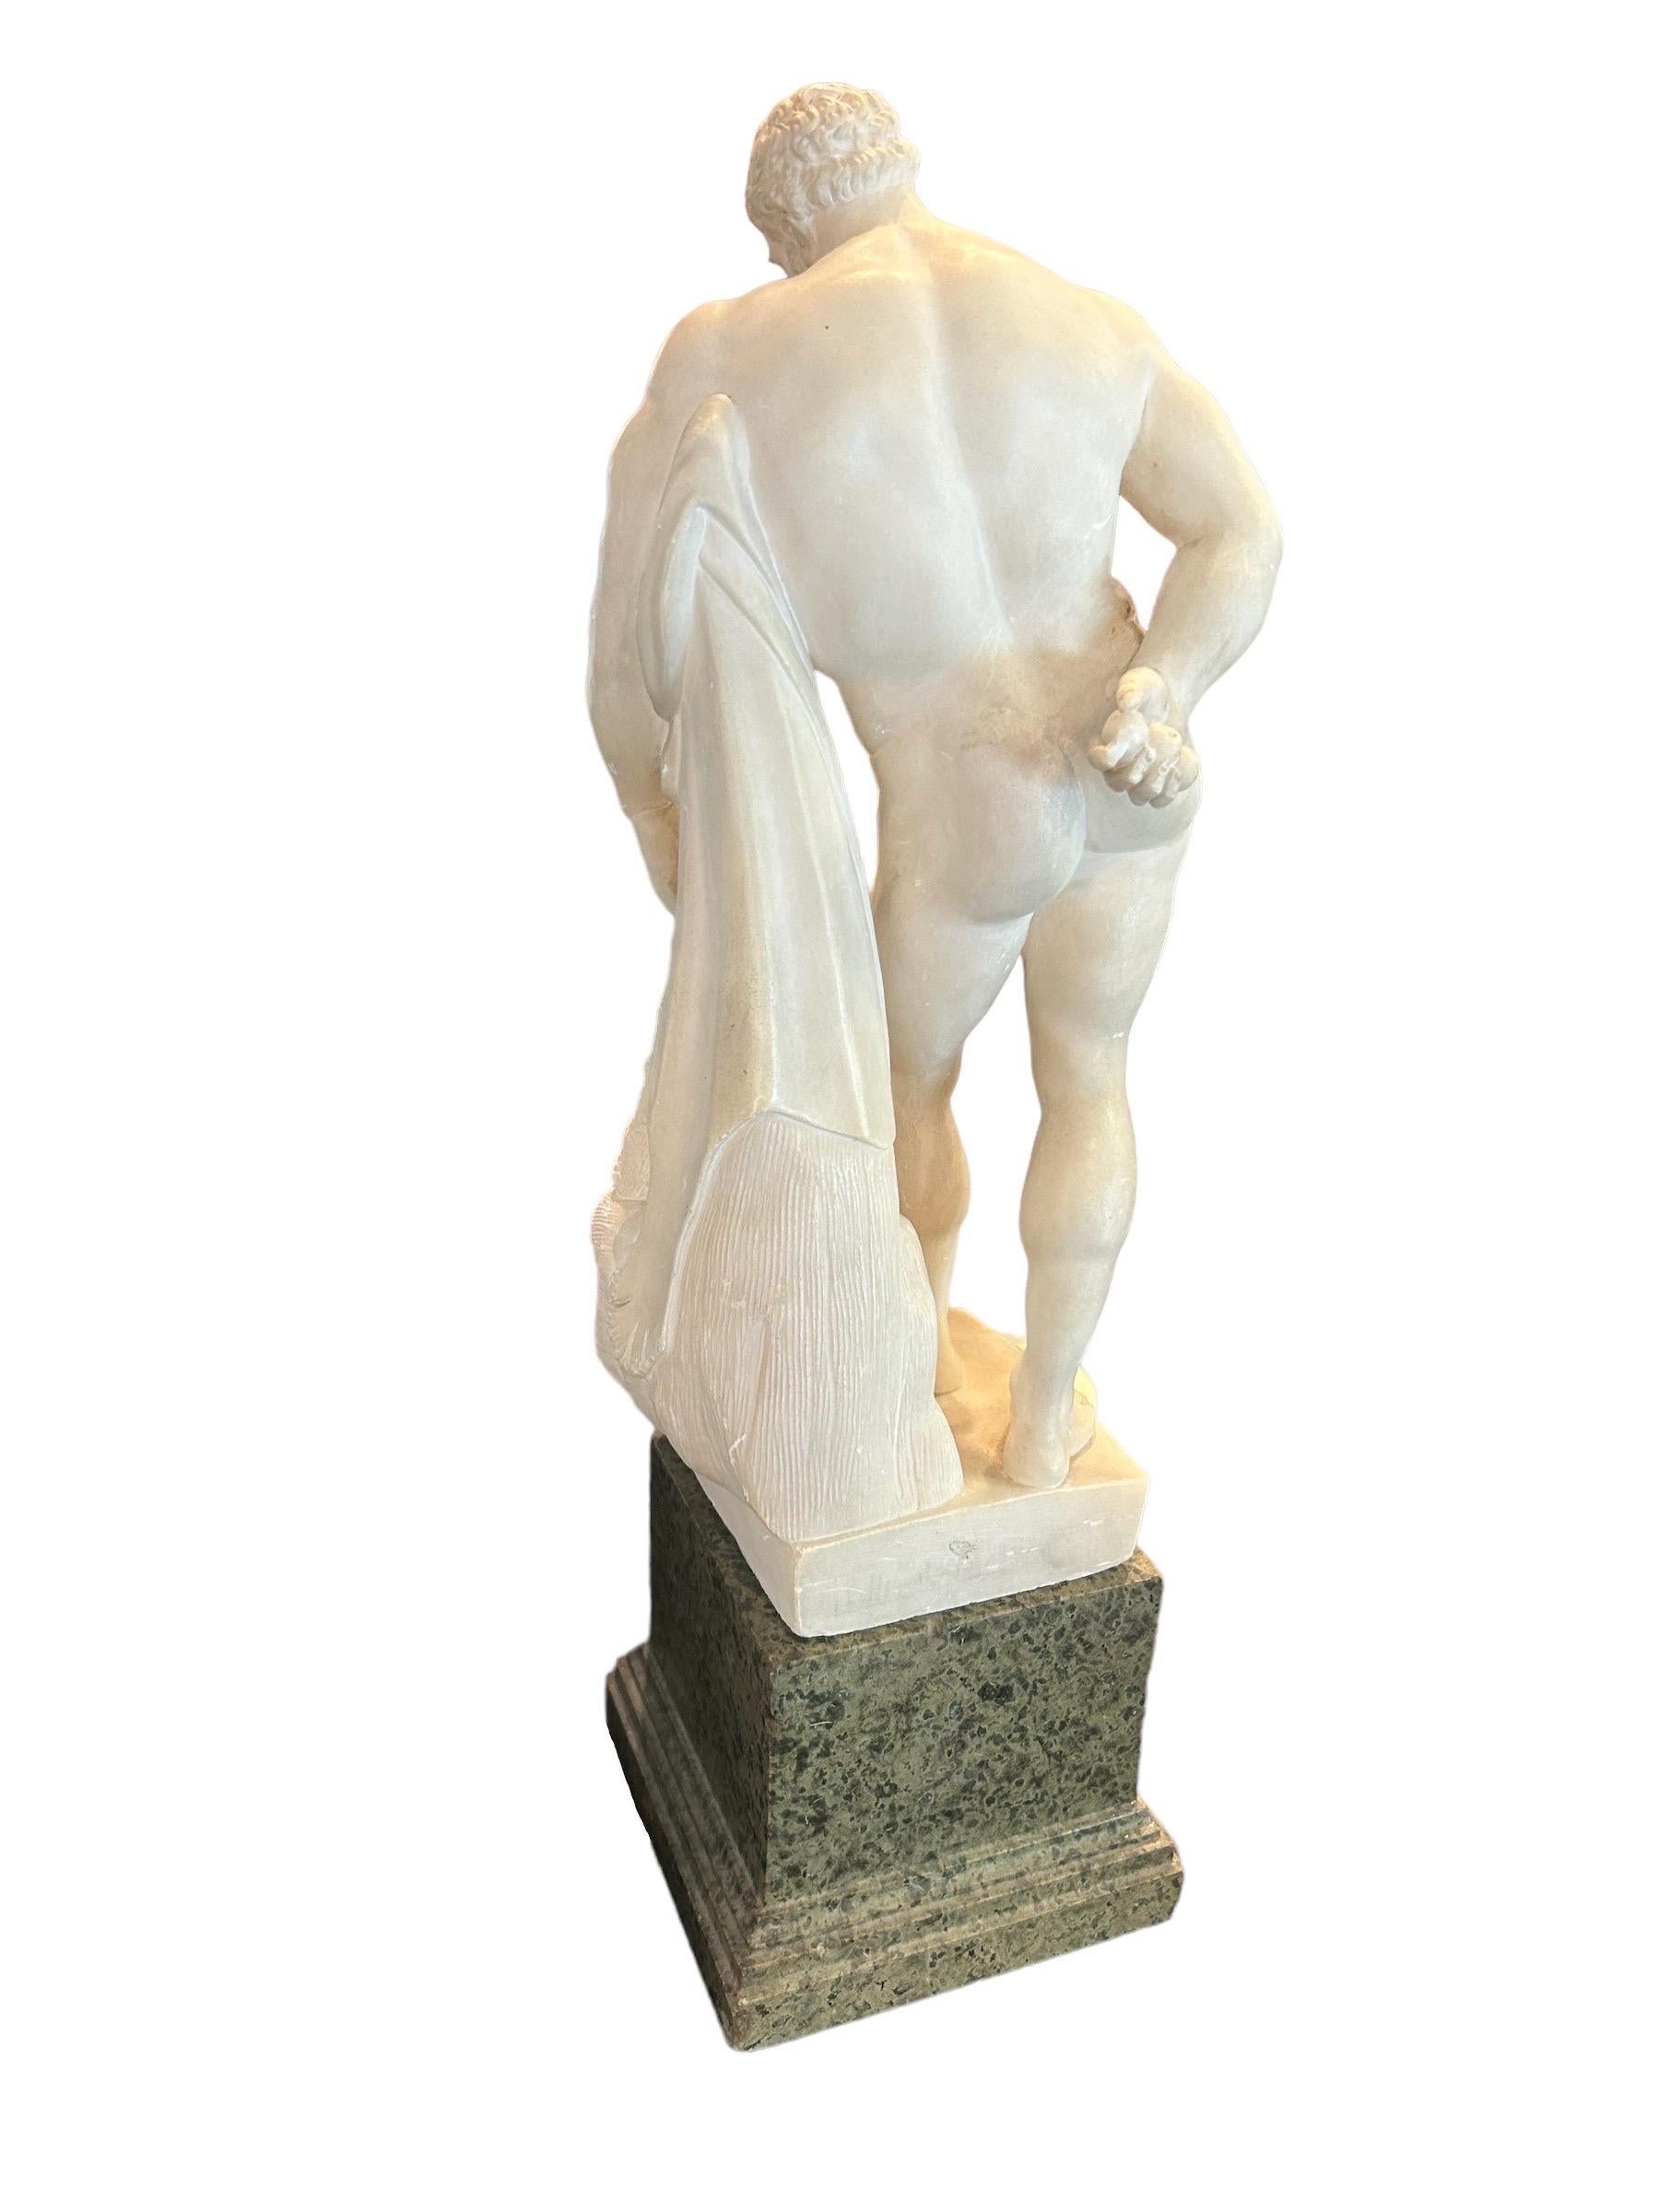 Early 19th century alabaster sculpture from the grand tour period depicting Farnese Hercules with base in verde Alpi marble 